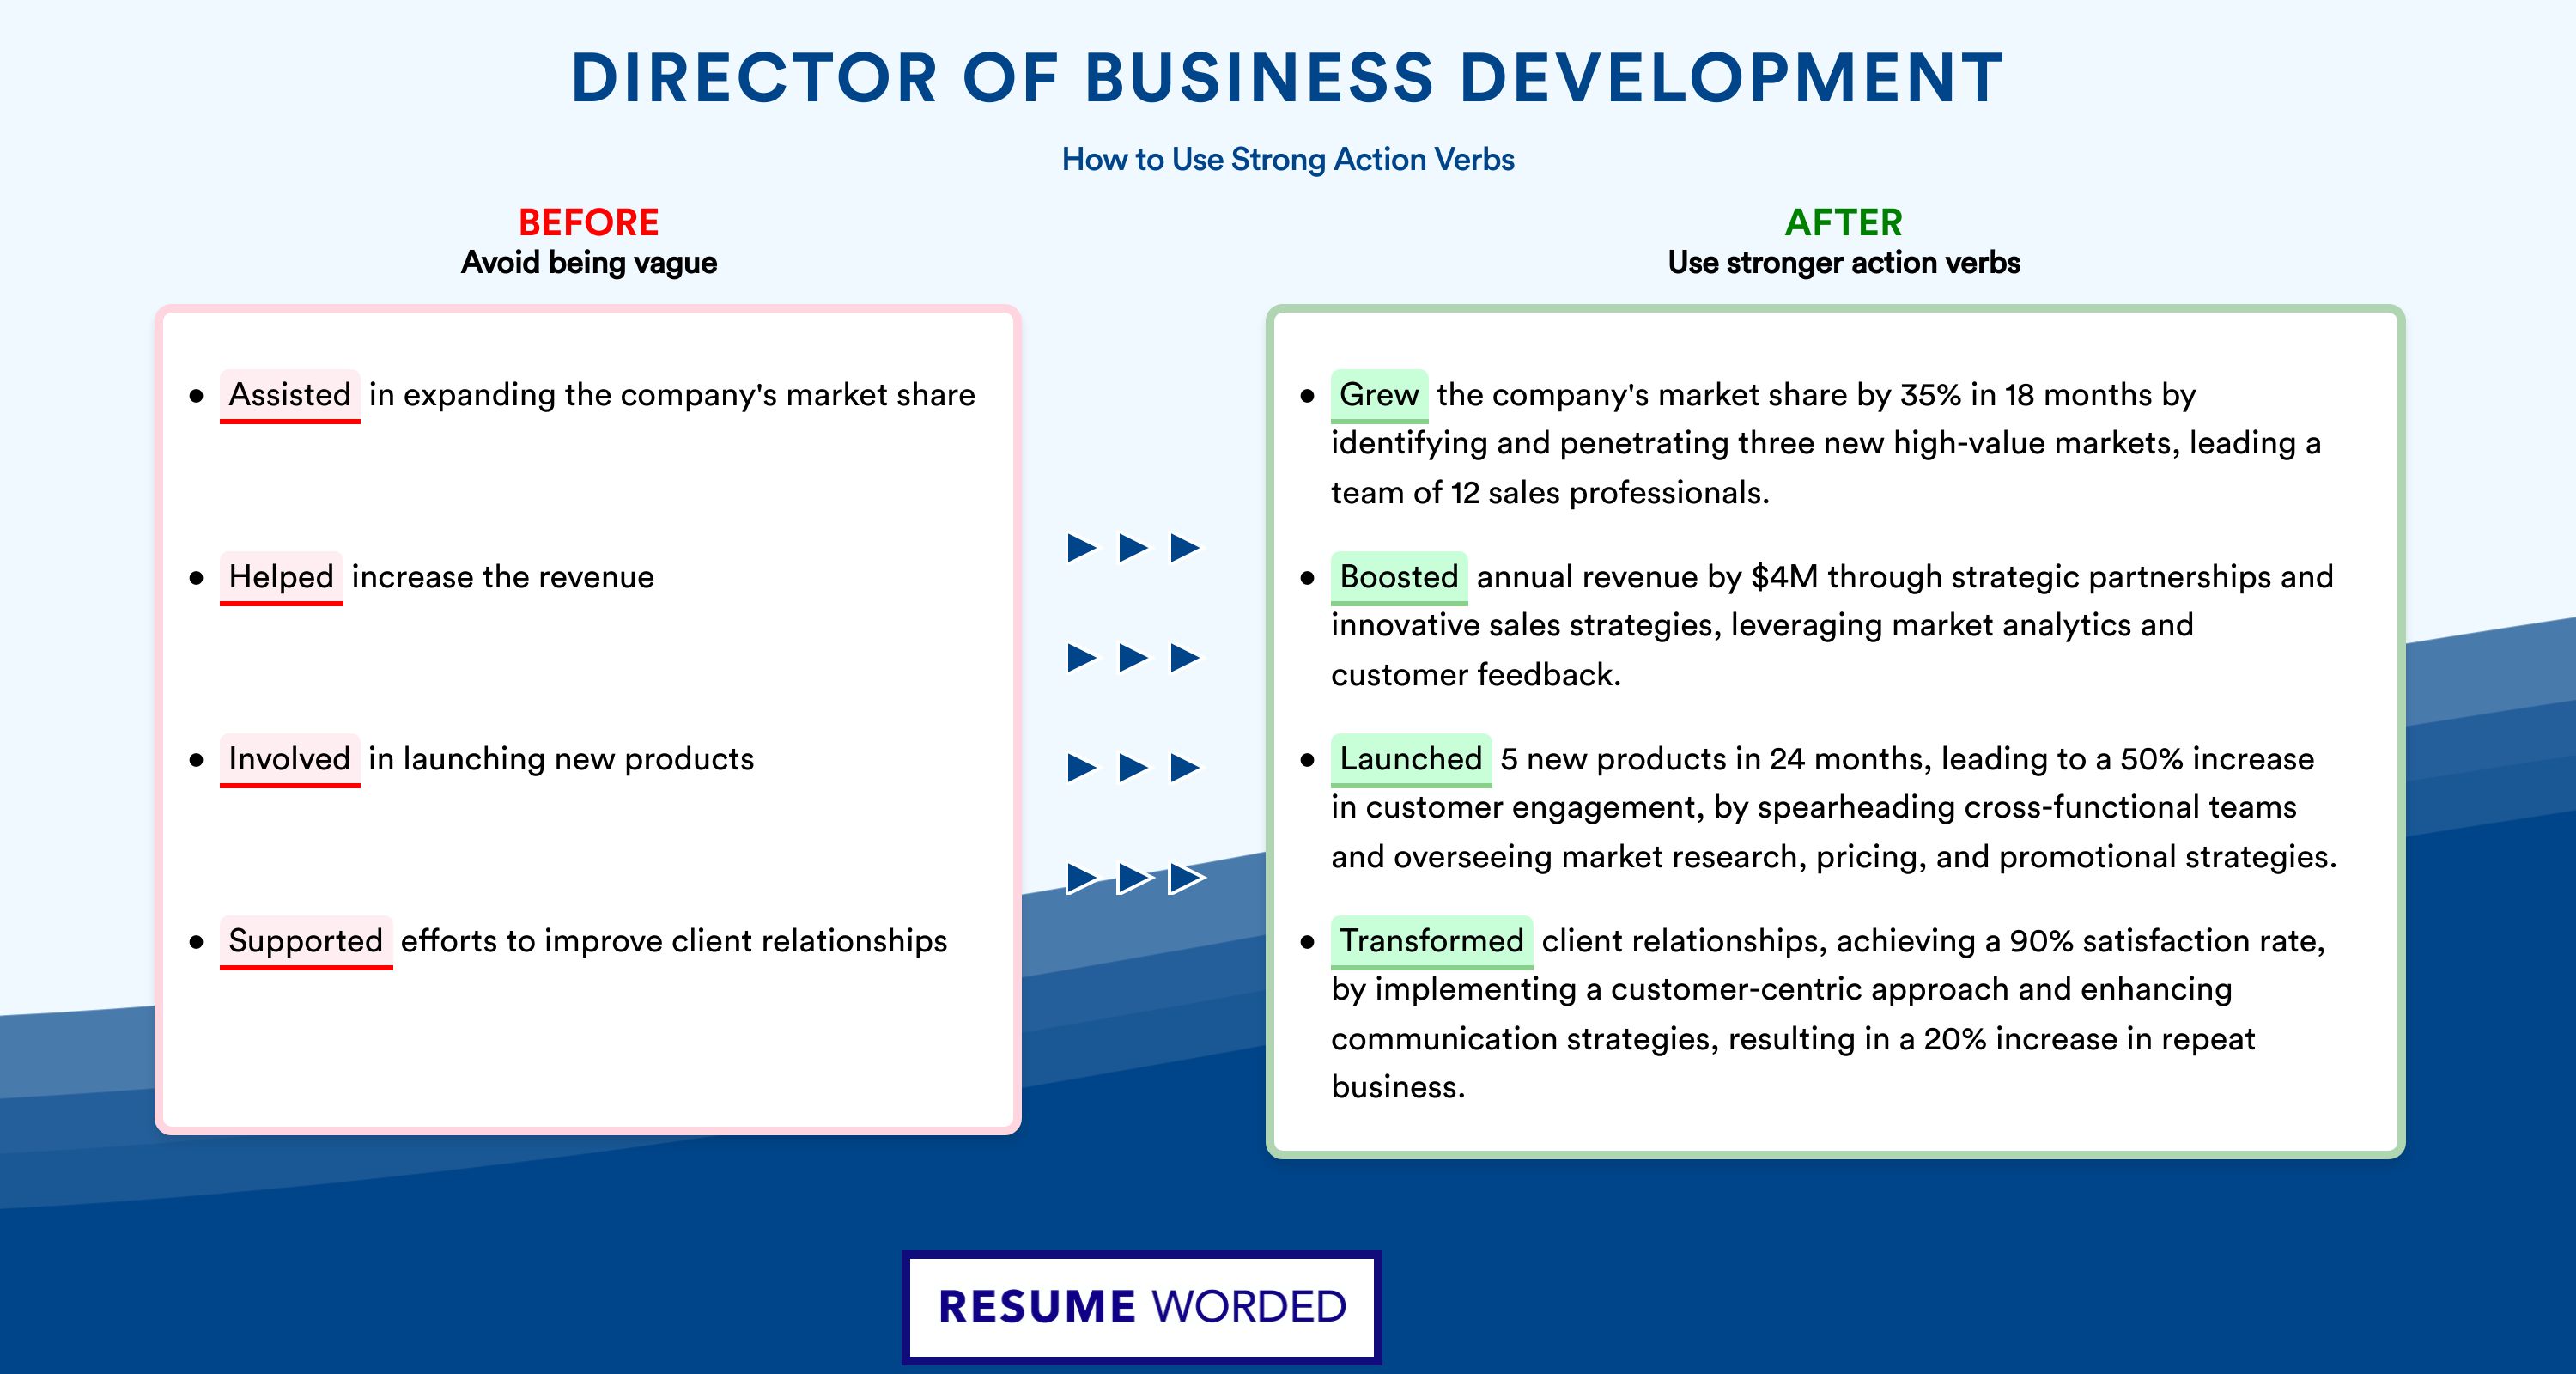 Action Verbs for Director of Business Development